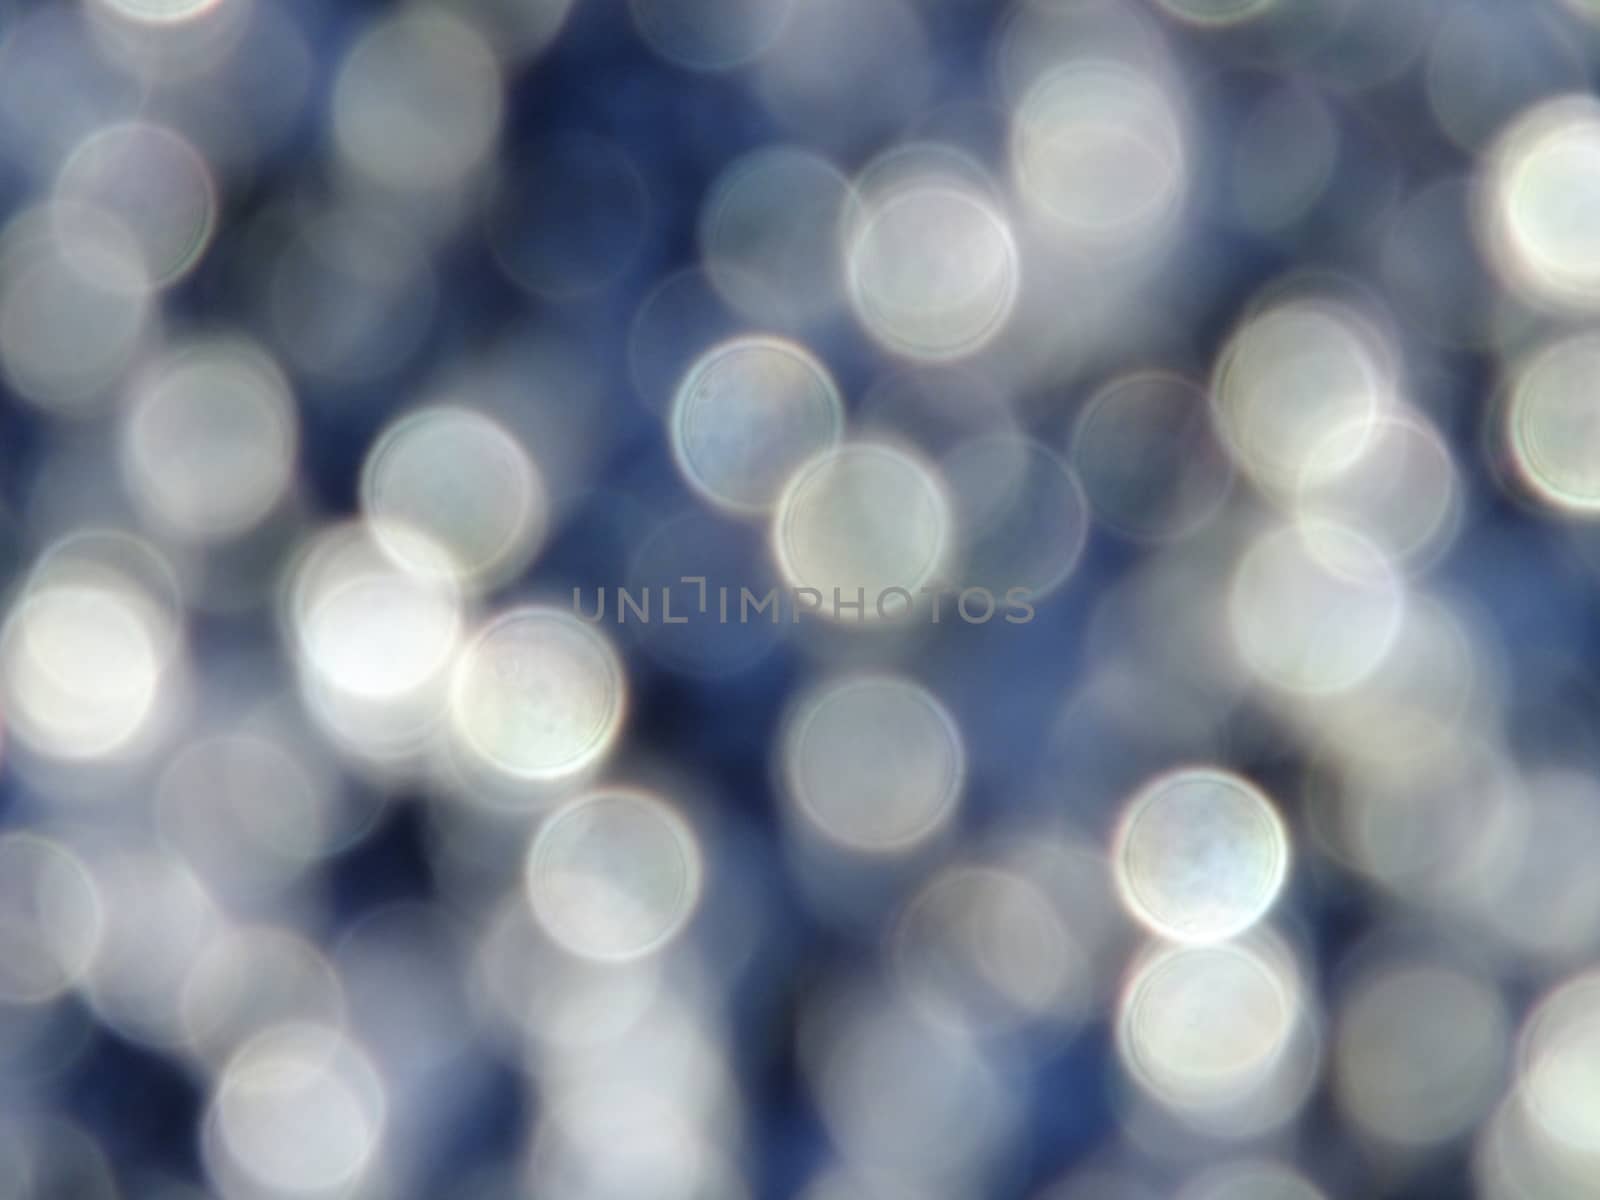 A gray blur in bokeh style - to be used as background